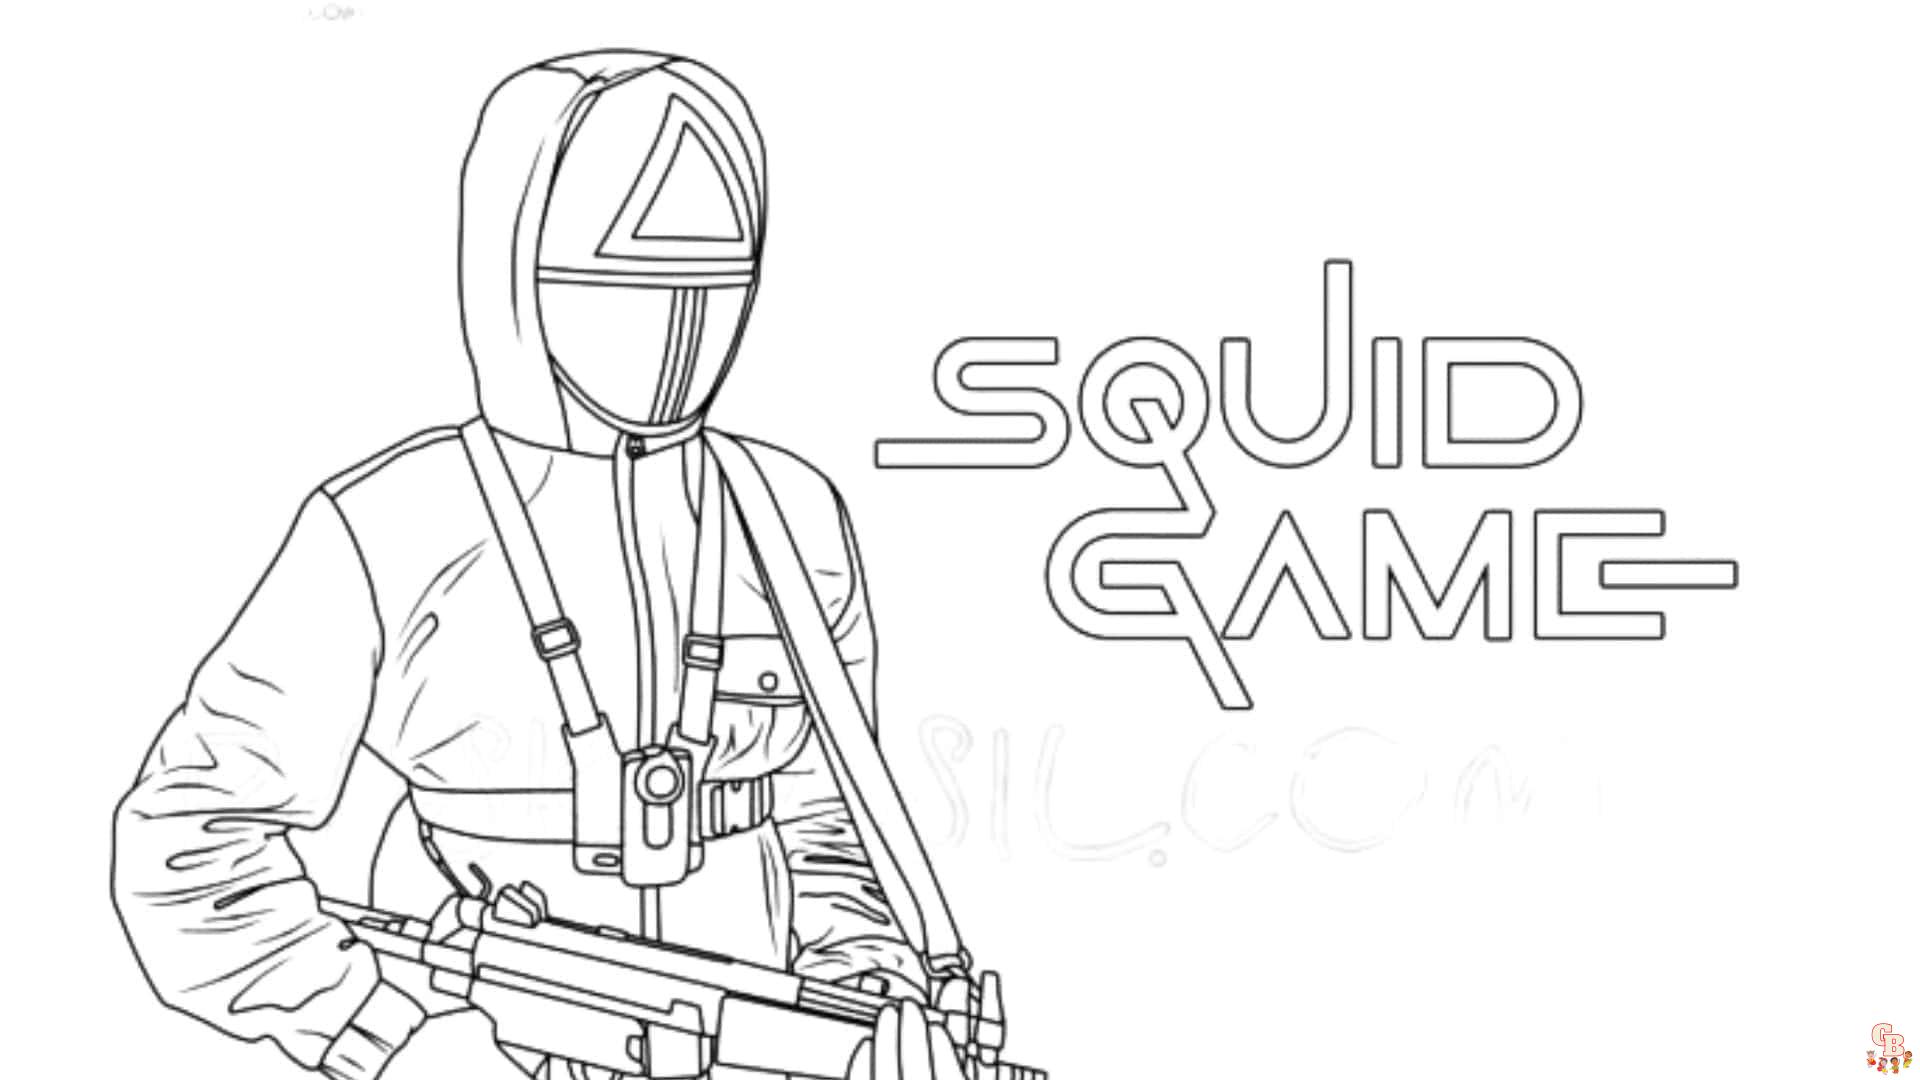 Squid Game Coloring Pages